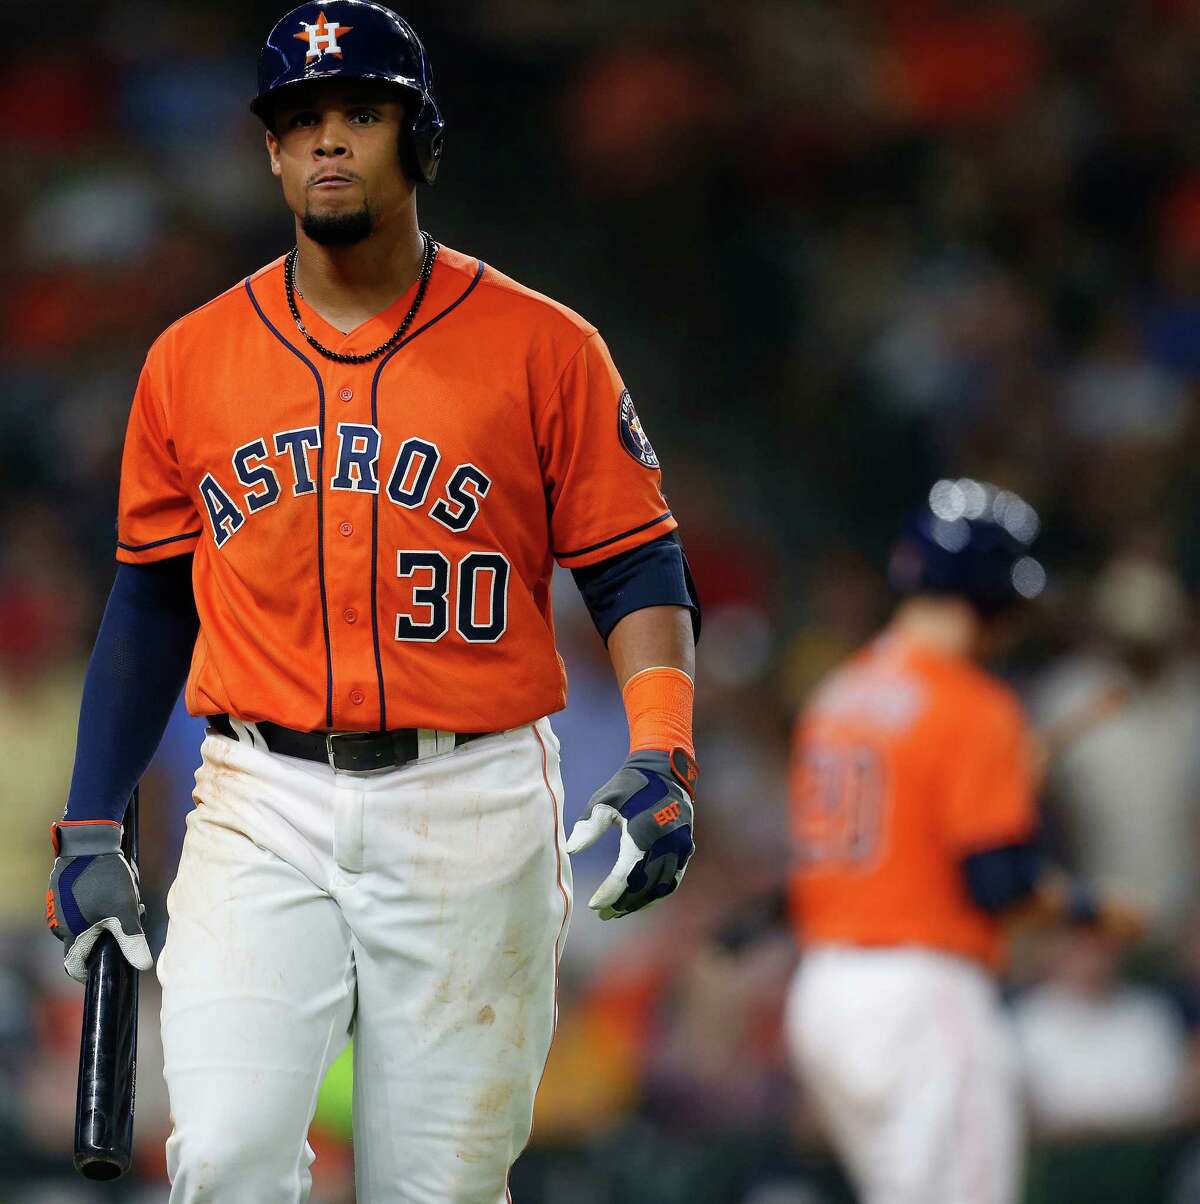 Before he was cut loose Wednesday, Carlos Gomez's rough 2016 season includes a pair of defensive blunders in Minnesota this week that cost the Astros in a loss to the Twins. Click through the gallery to see the most disappointing acquisitions in Astros history.